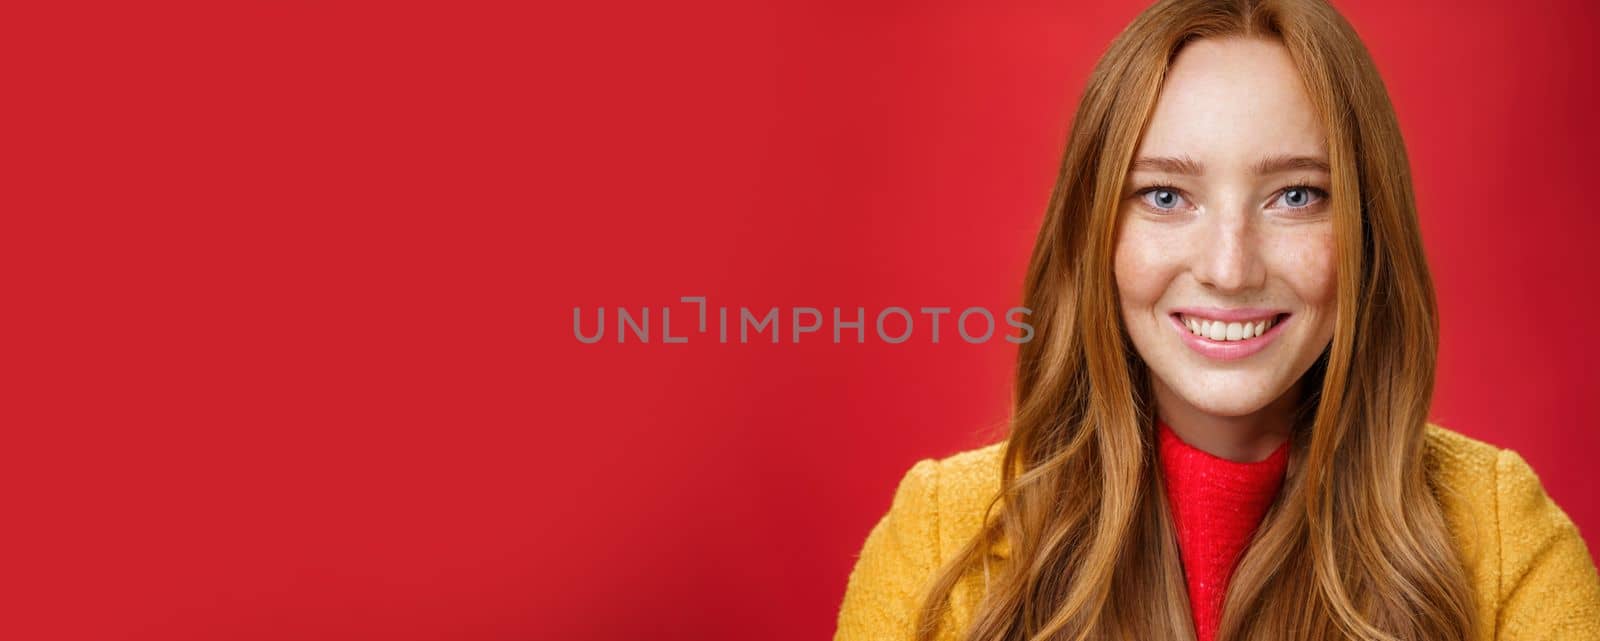 Headshot of hopeful and happy young redhead 20s girlfriend with cute freckles and blue eyes smiling broadly with faithful excited expression having high hopes, posing over red background. Emotions concept